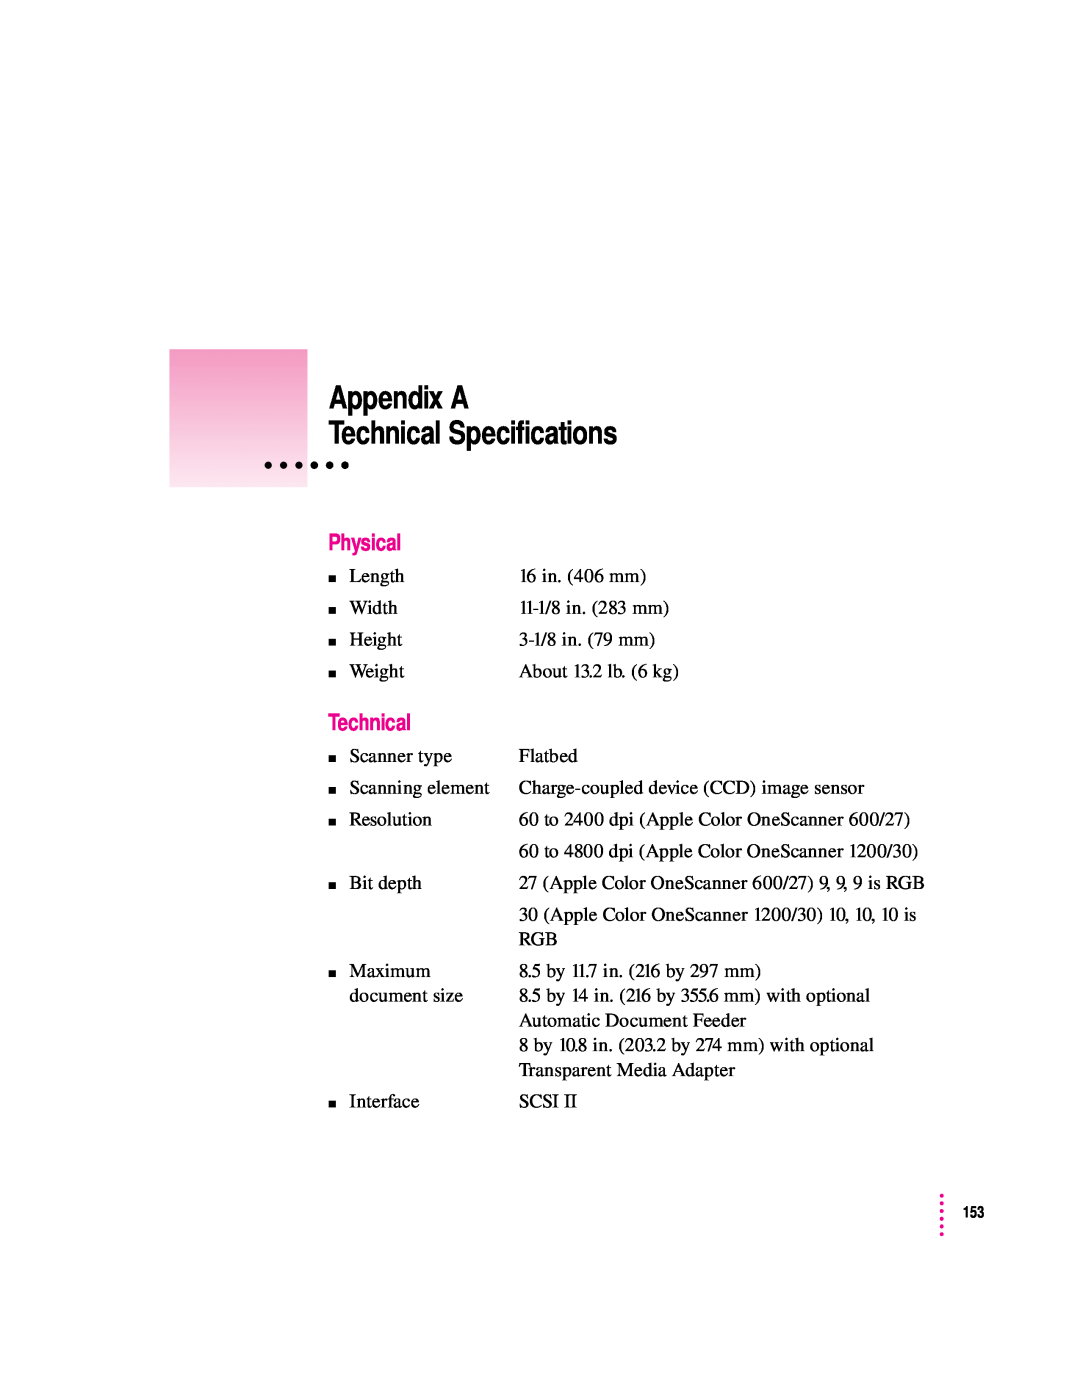 Apple 1230, 627 user manual Appendix A Technical Specifications, Physical 